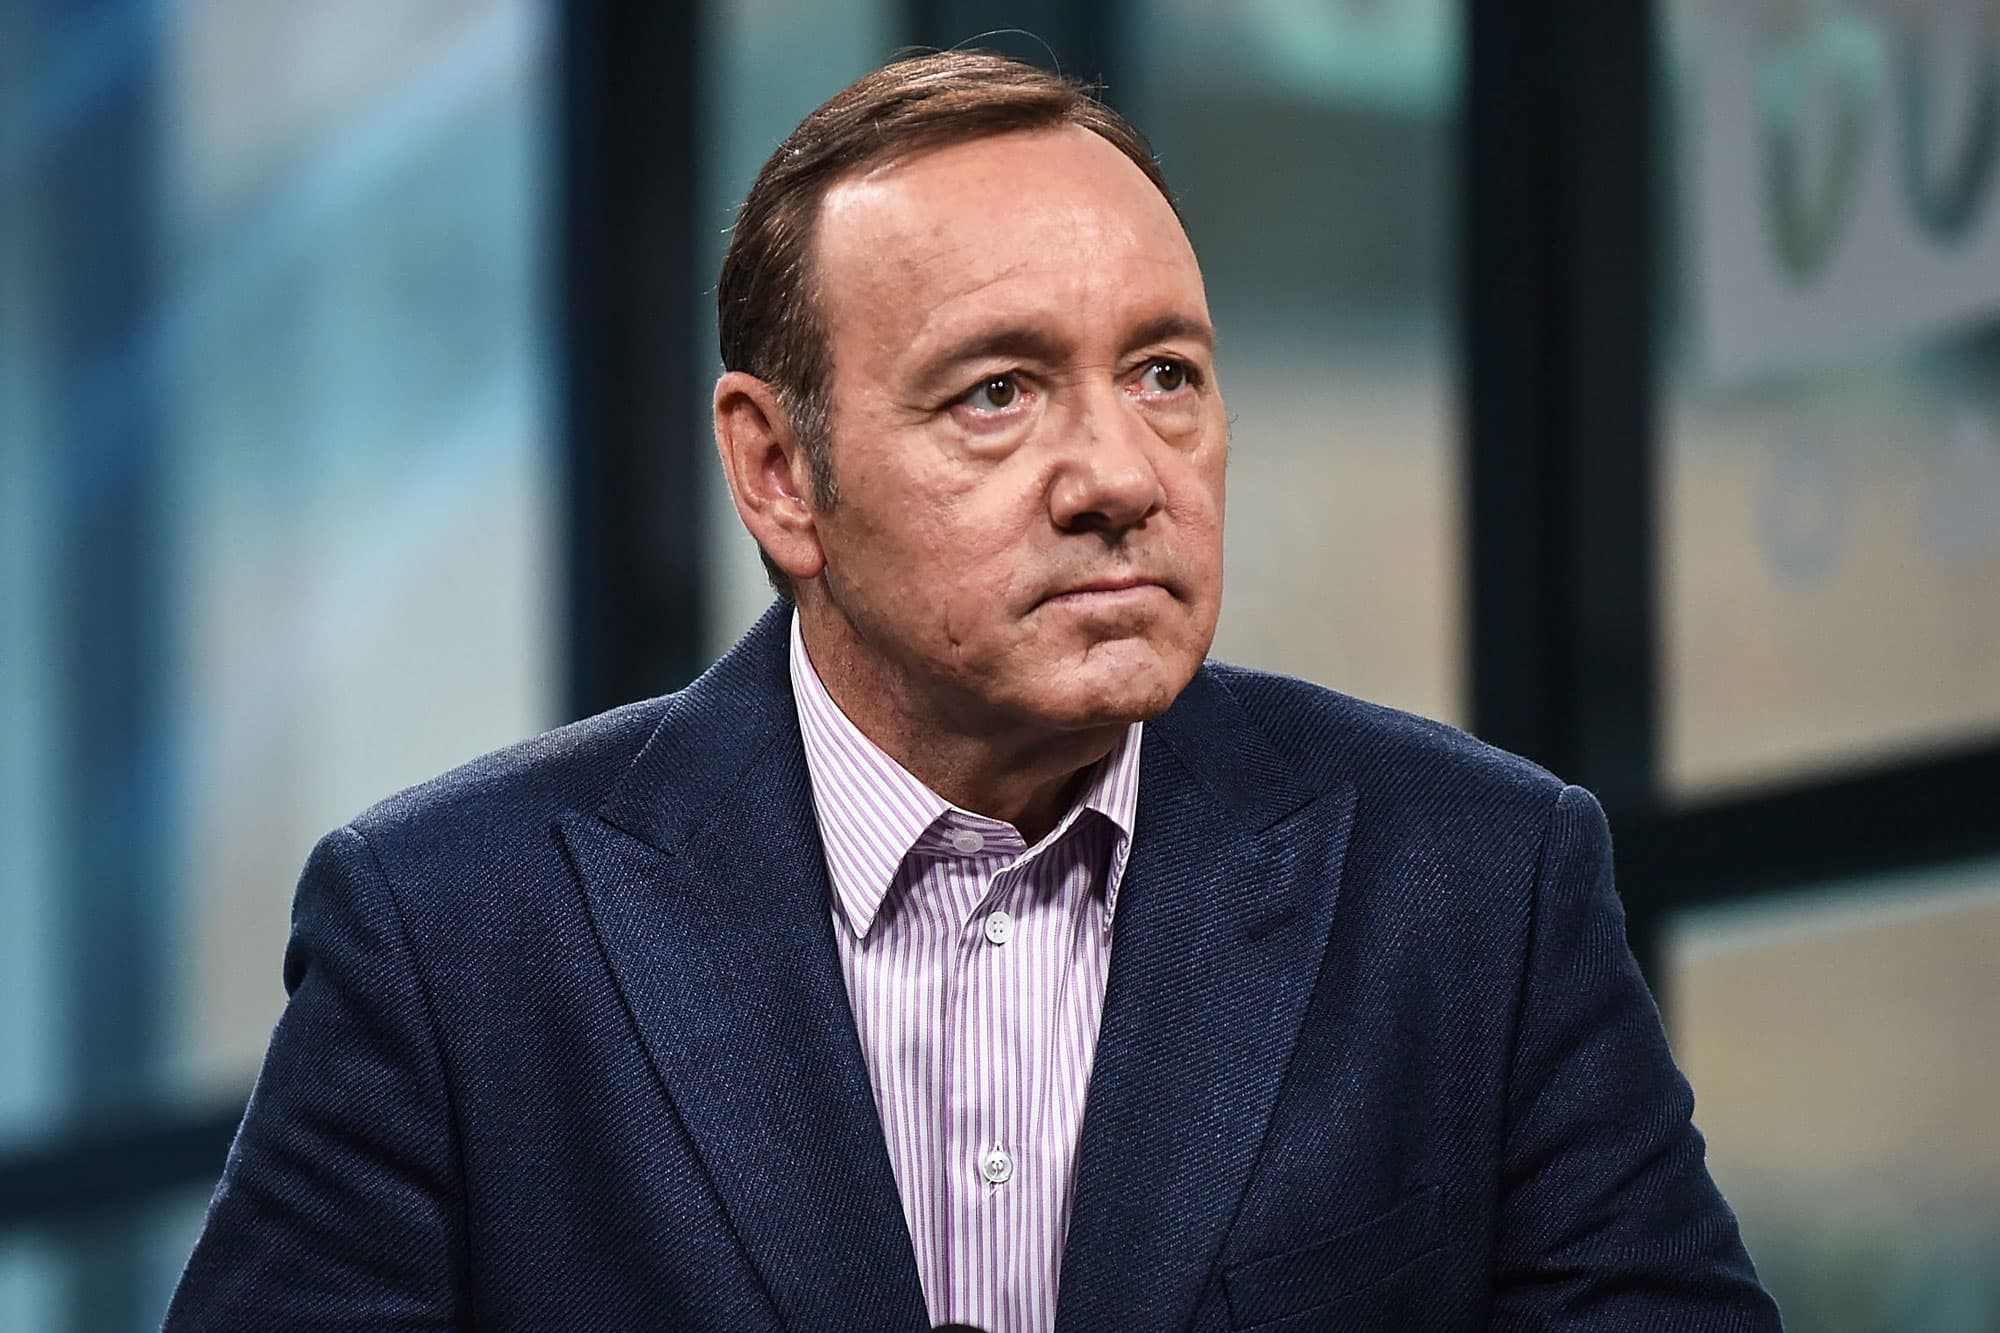 Kevin Spacey appears in London court to answer sexual assault charges